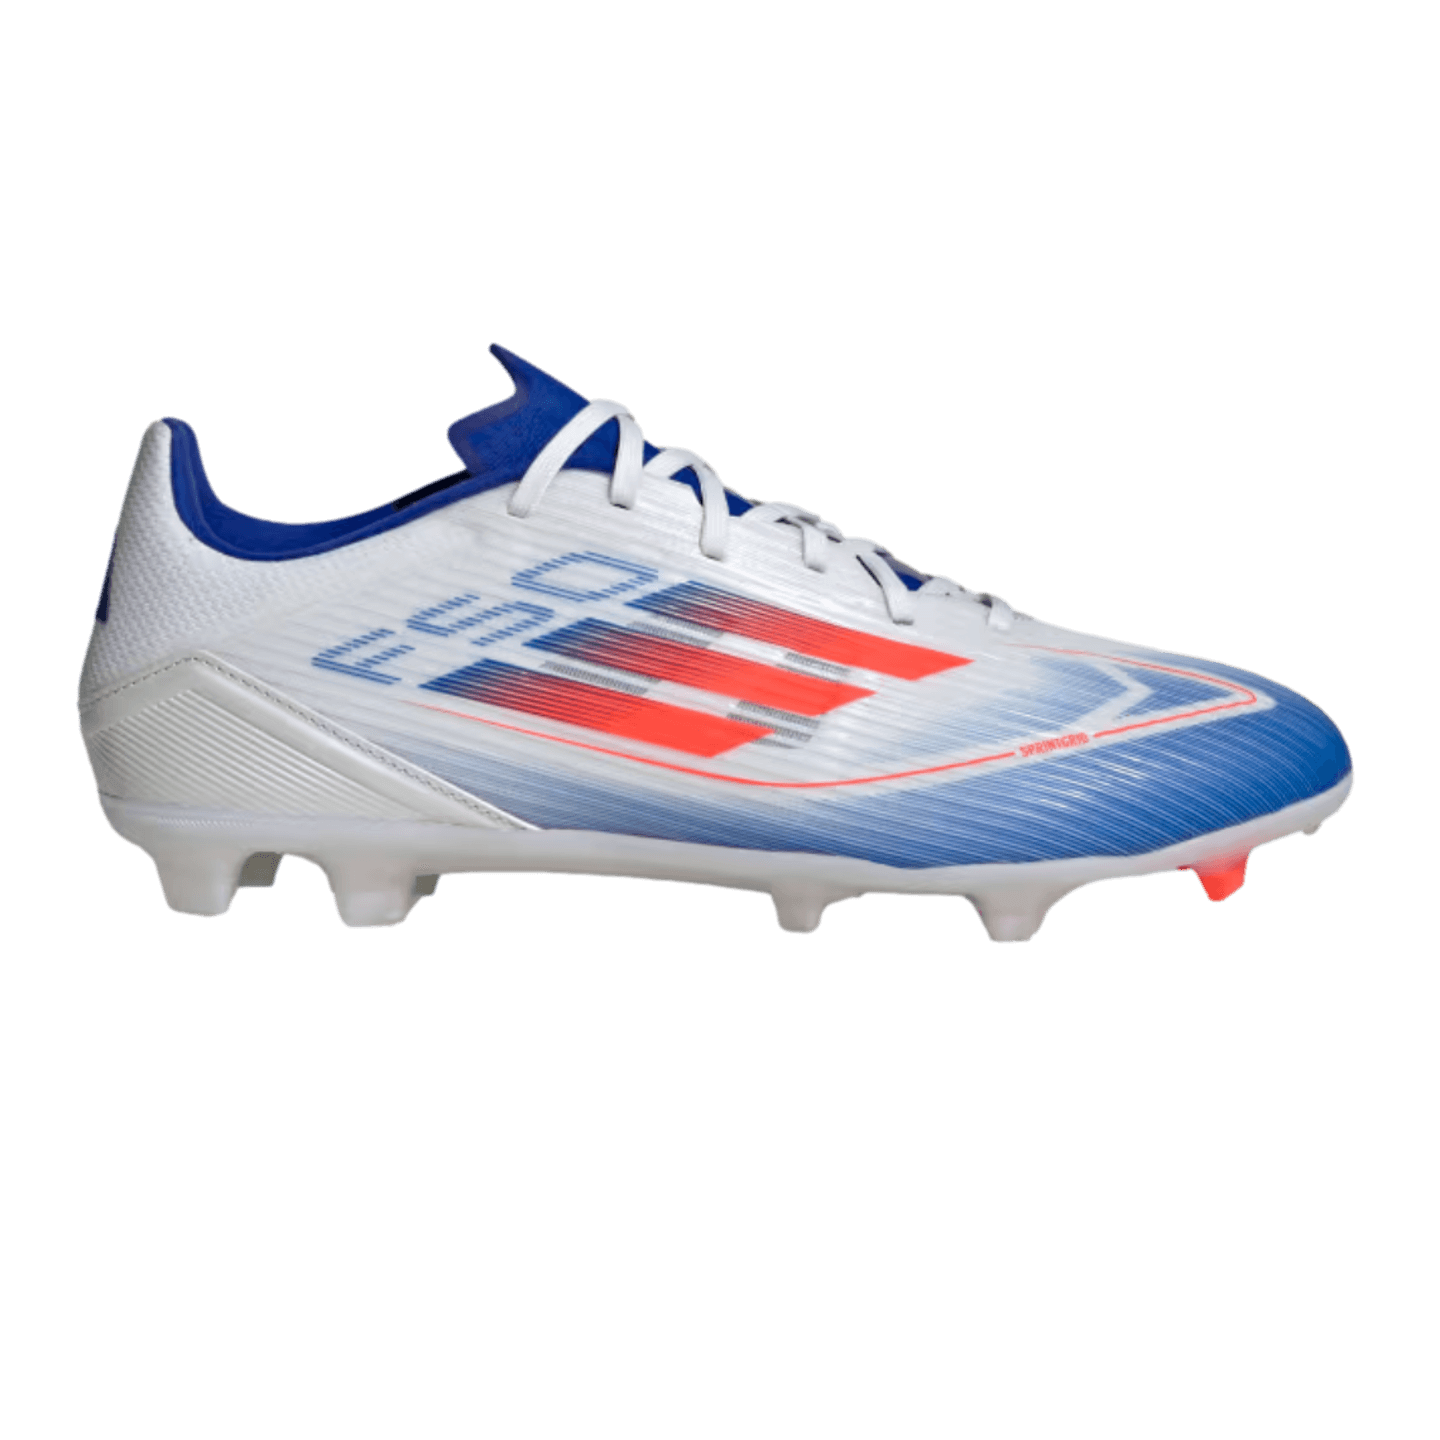 Adidas F50 League Firm Ground Cleats